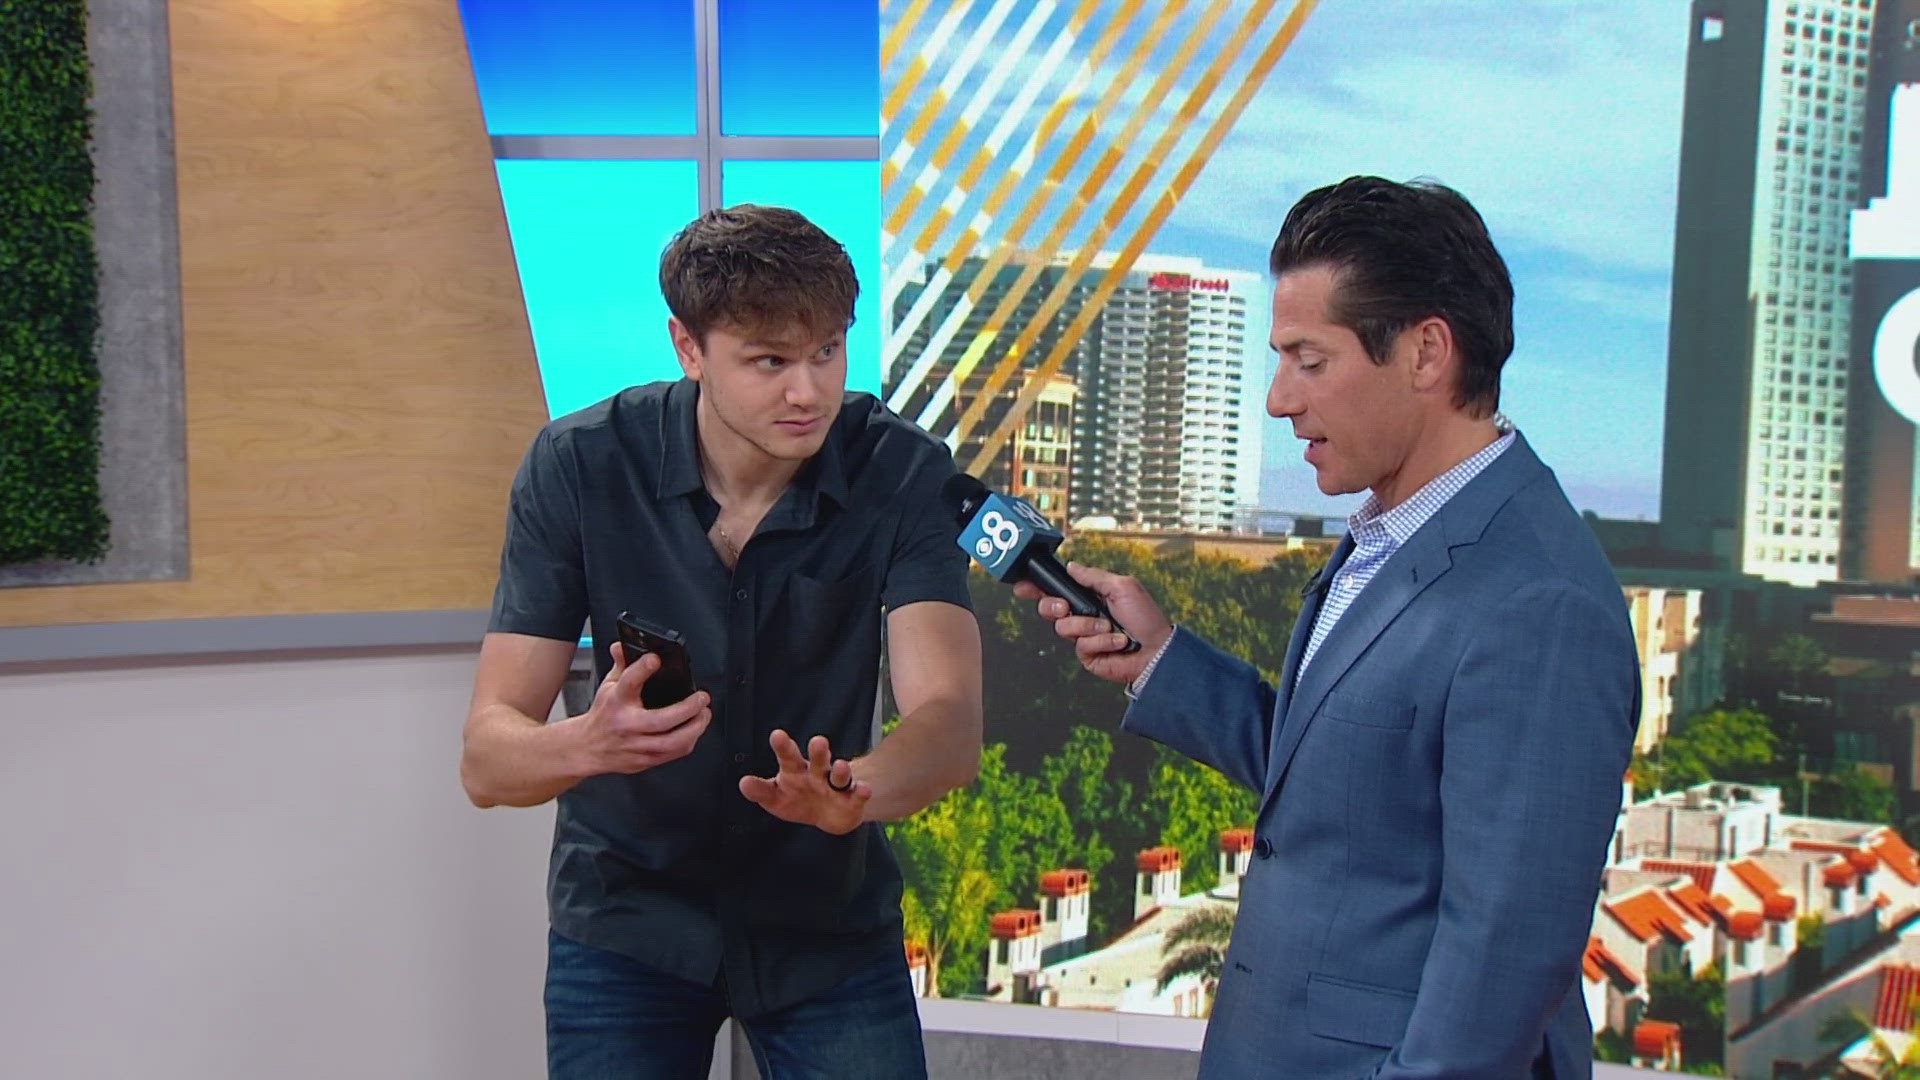 Anthony Prezutti, Fringe Fest performer shared one of his tricks with CBS 8. The San Diego International Fringe Festival runs May 16-26.  More: SDfringe.or